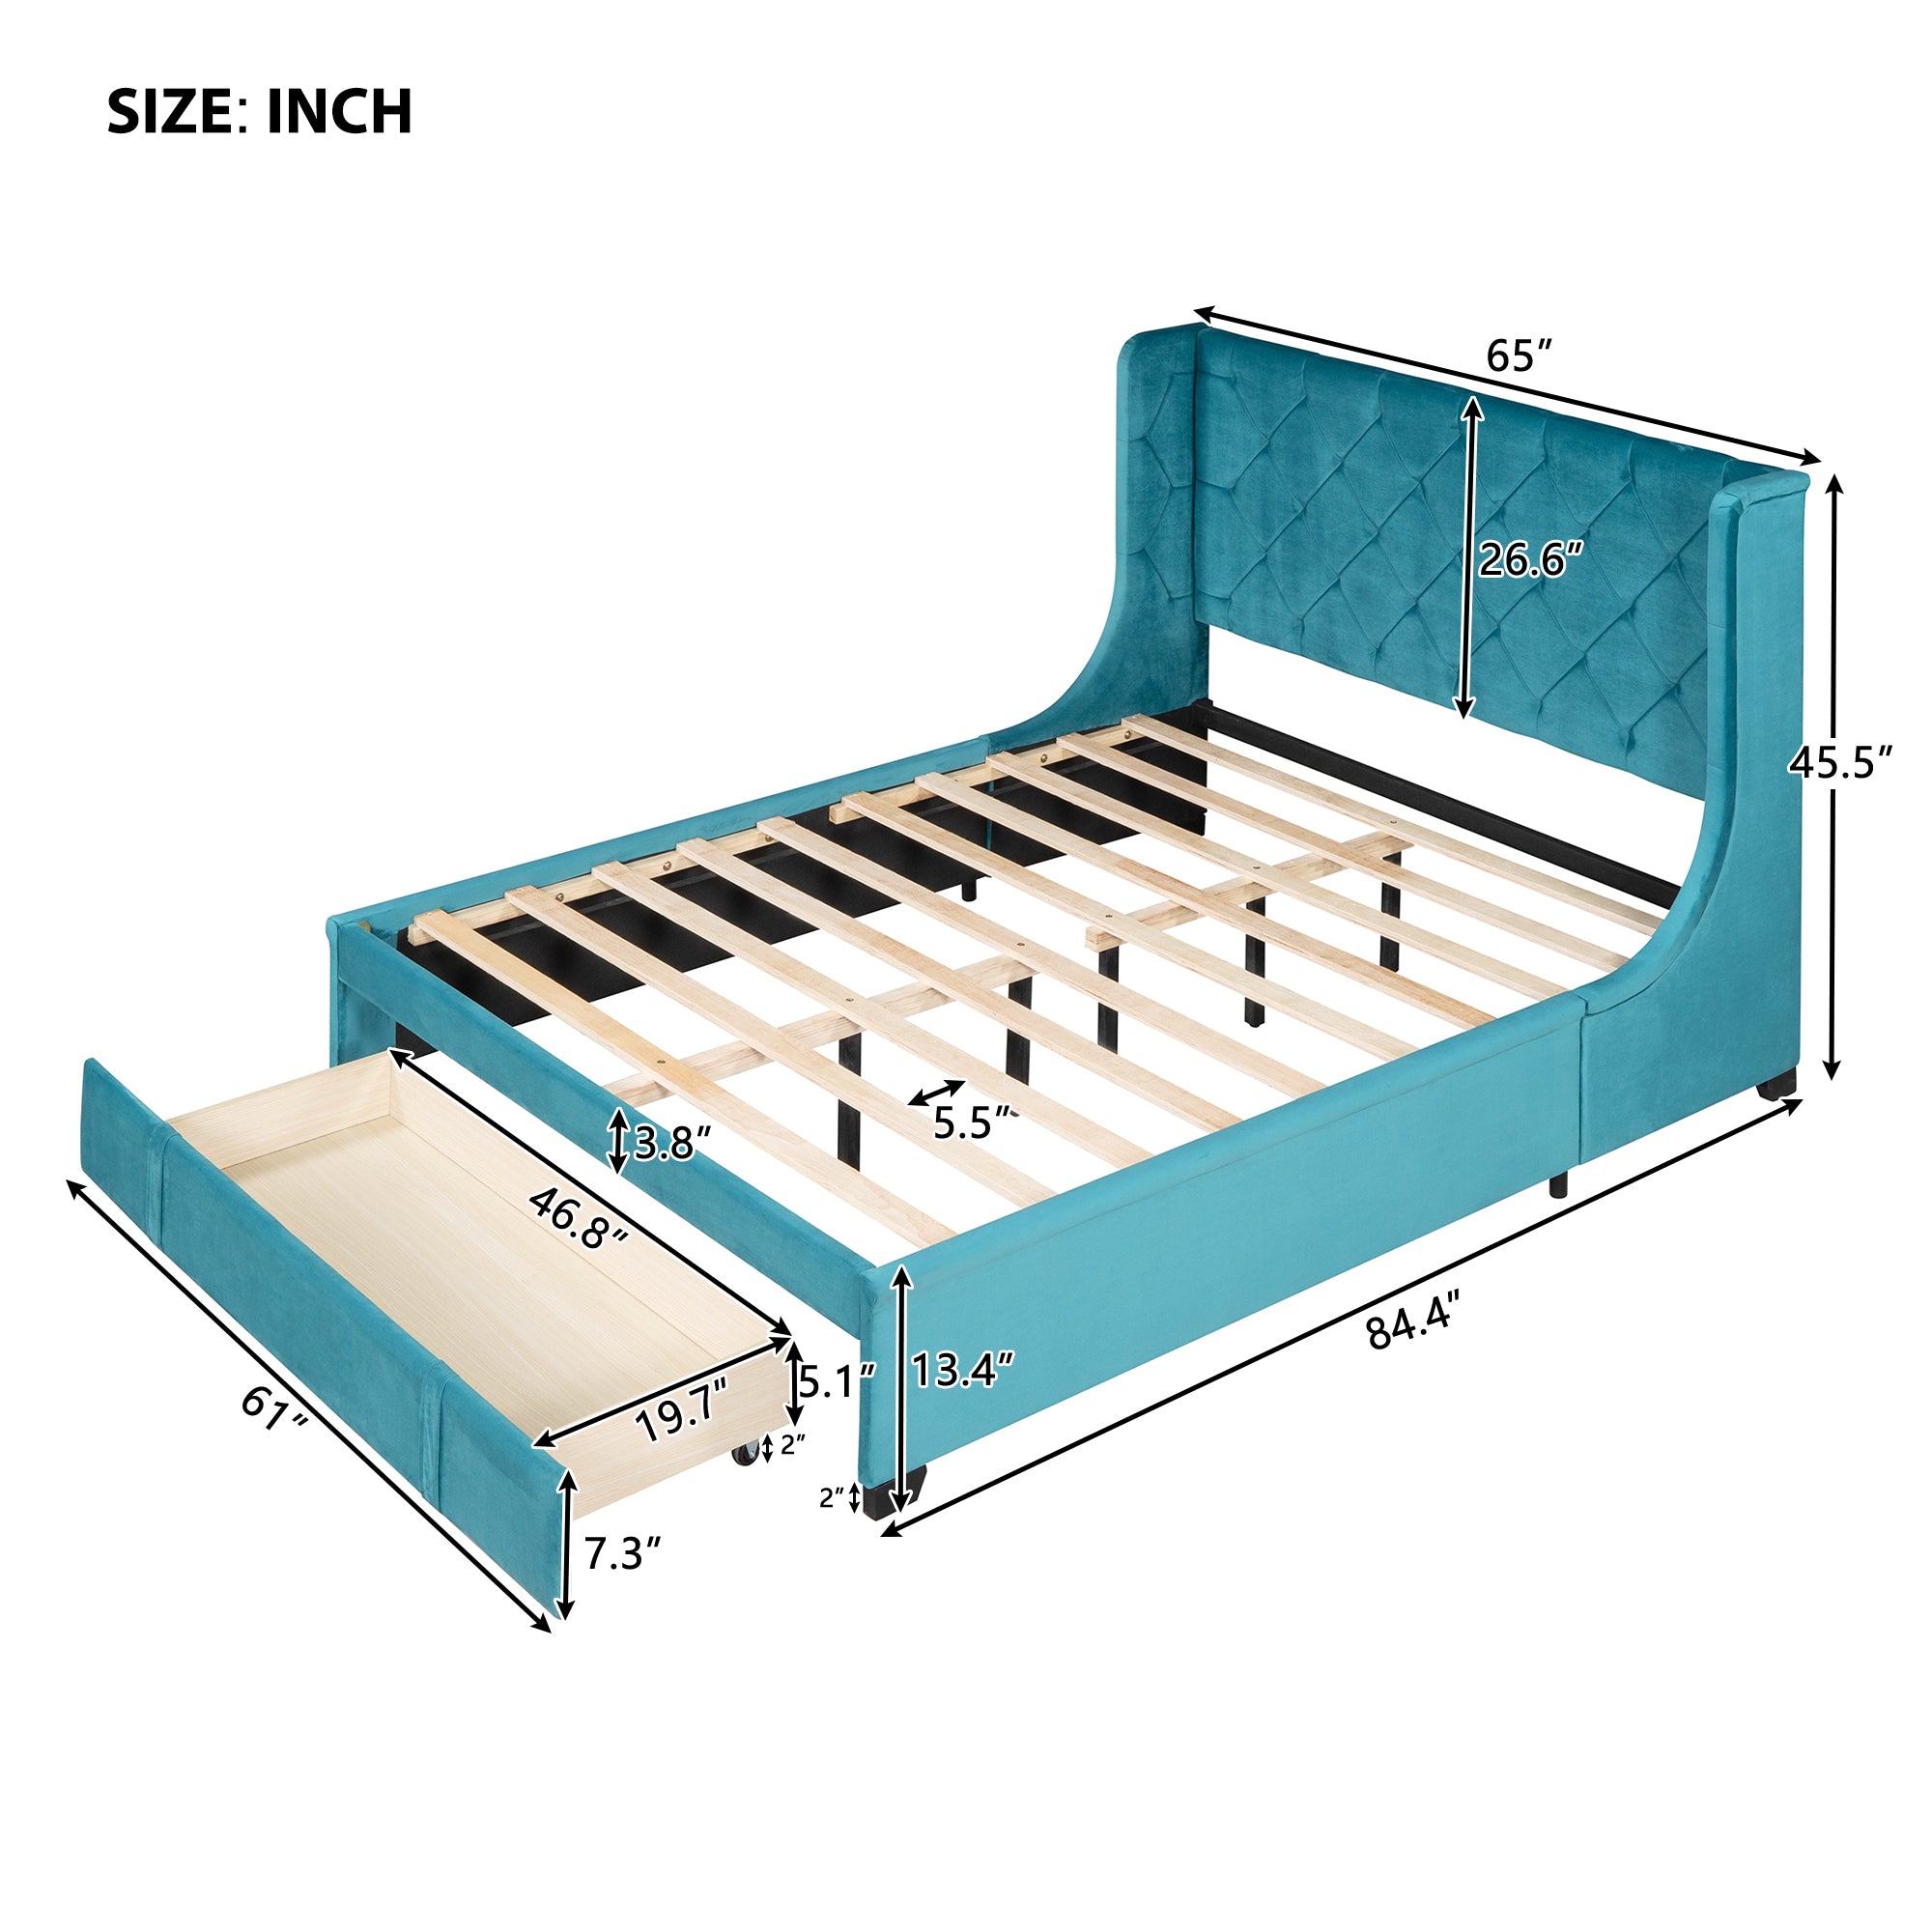 Queen Size Storage Bed Velvet Upholstered Platform Bed with Wingback Headboard and a Big Drawer - Blue